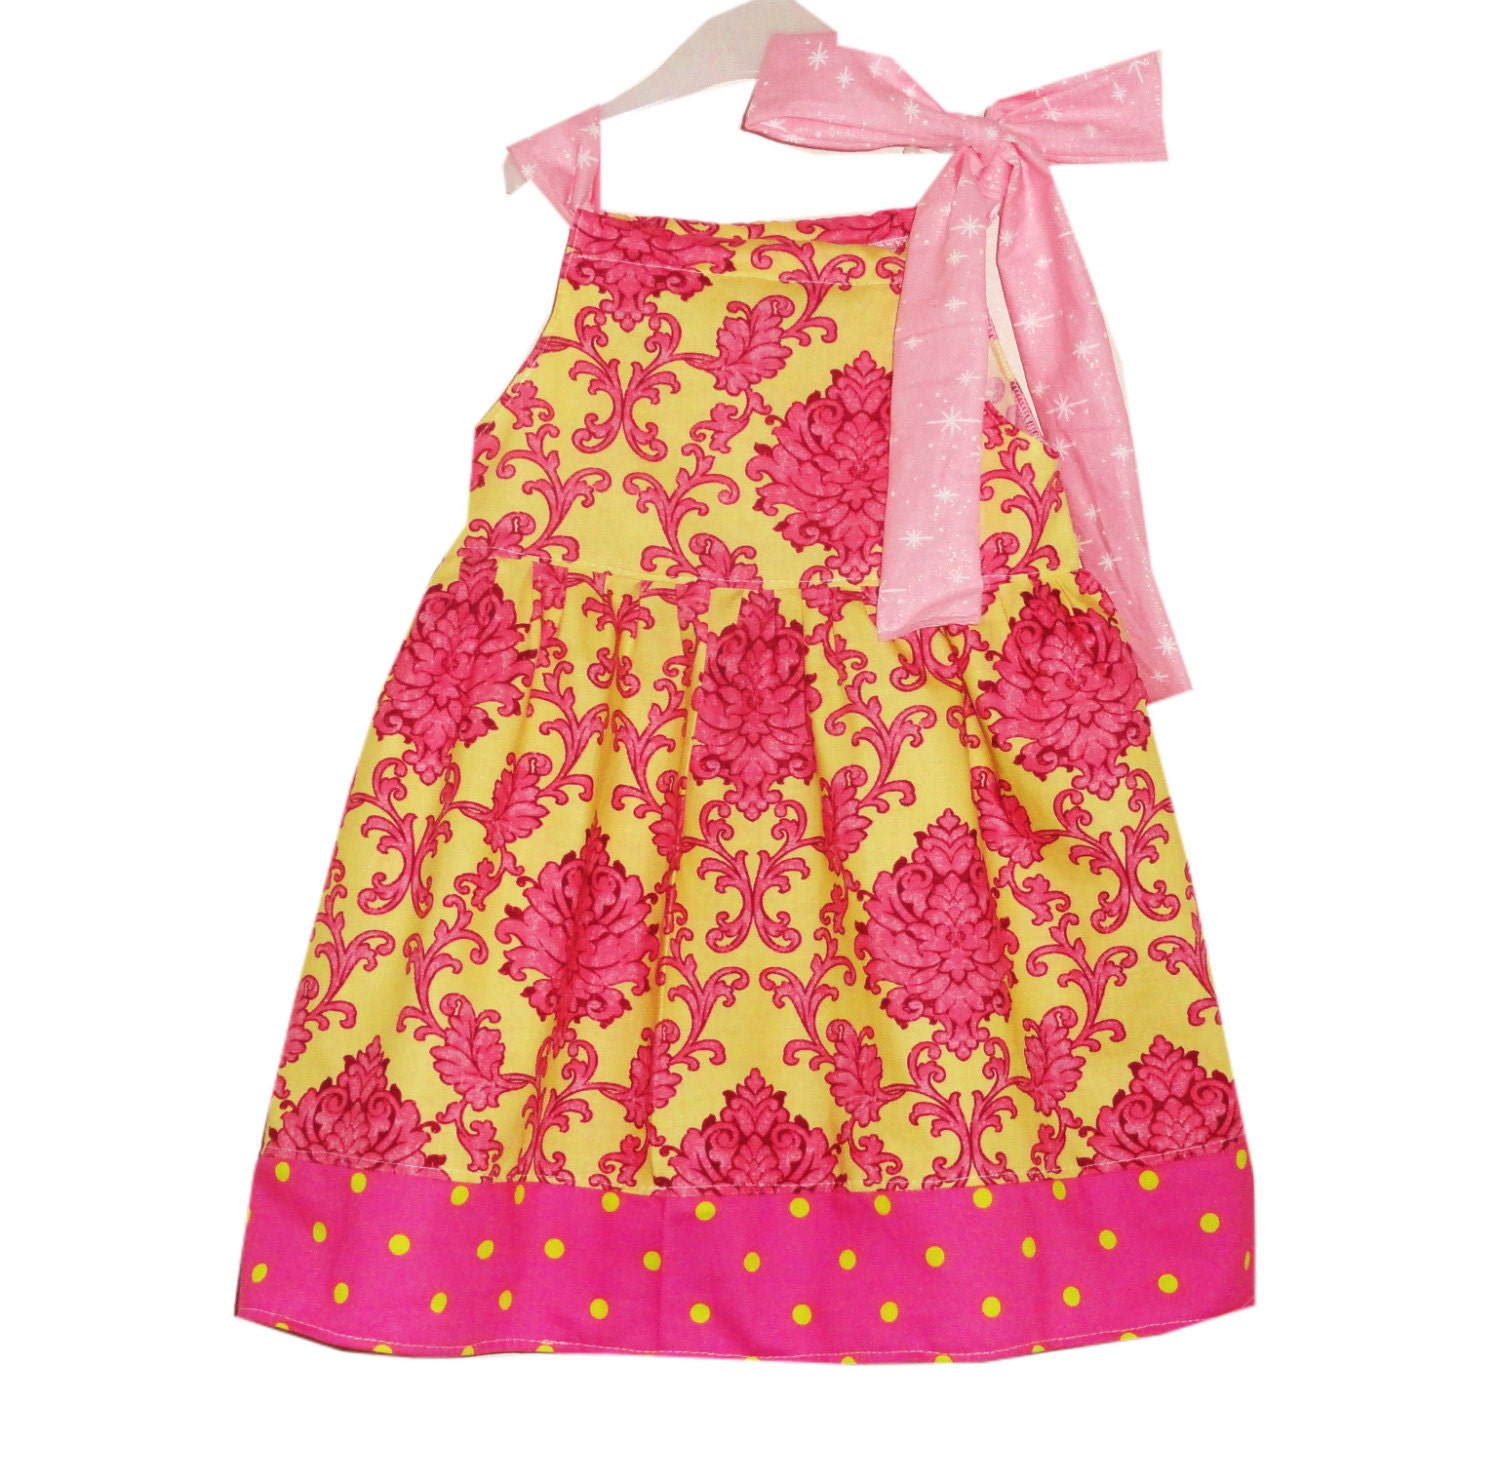 Girls Pillowcase Bow Tie Dress You Pick the Fabric - Amievoltaire